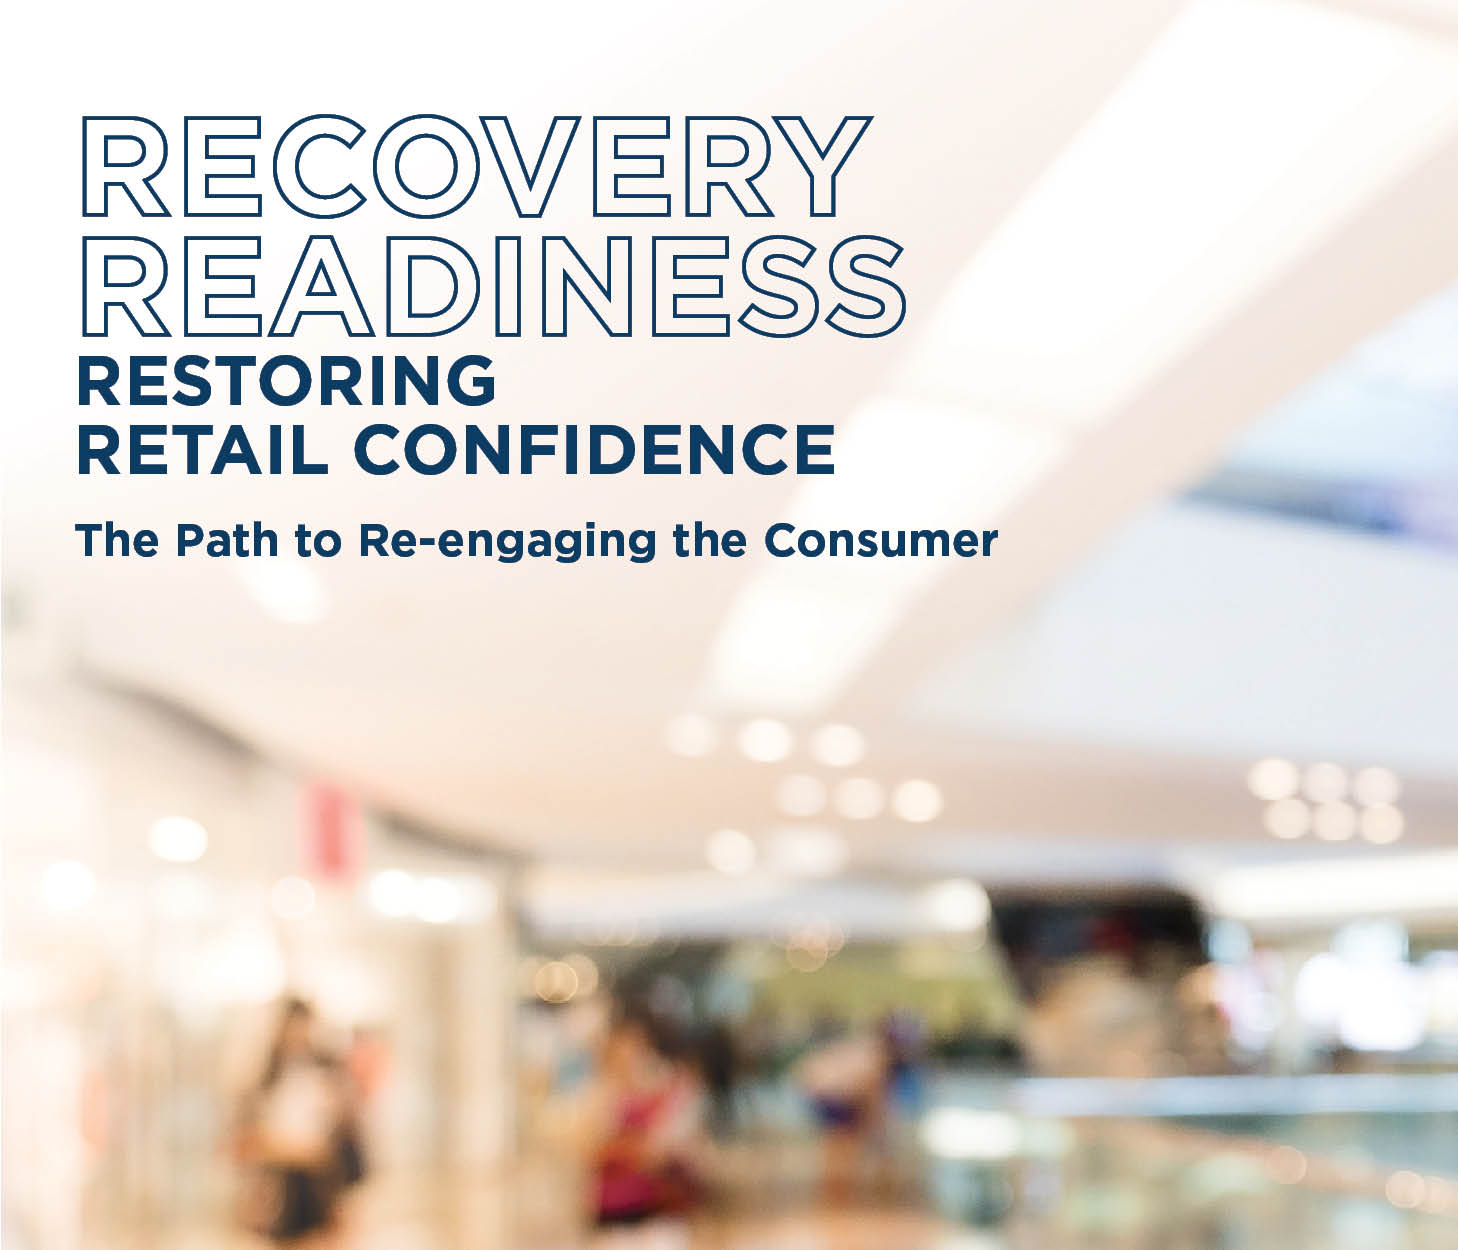 Recovery readiness, restoring retail confidence the path to re-engaging the customer - cushman wakefield stevenson CWS winnipeg